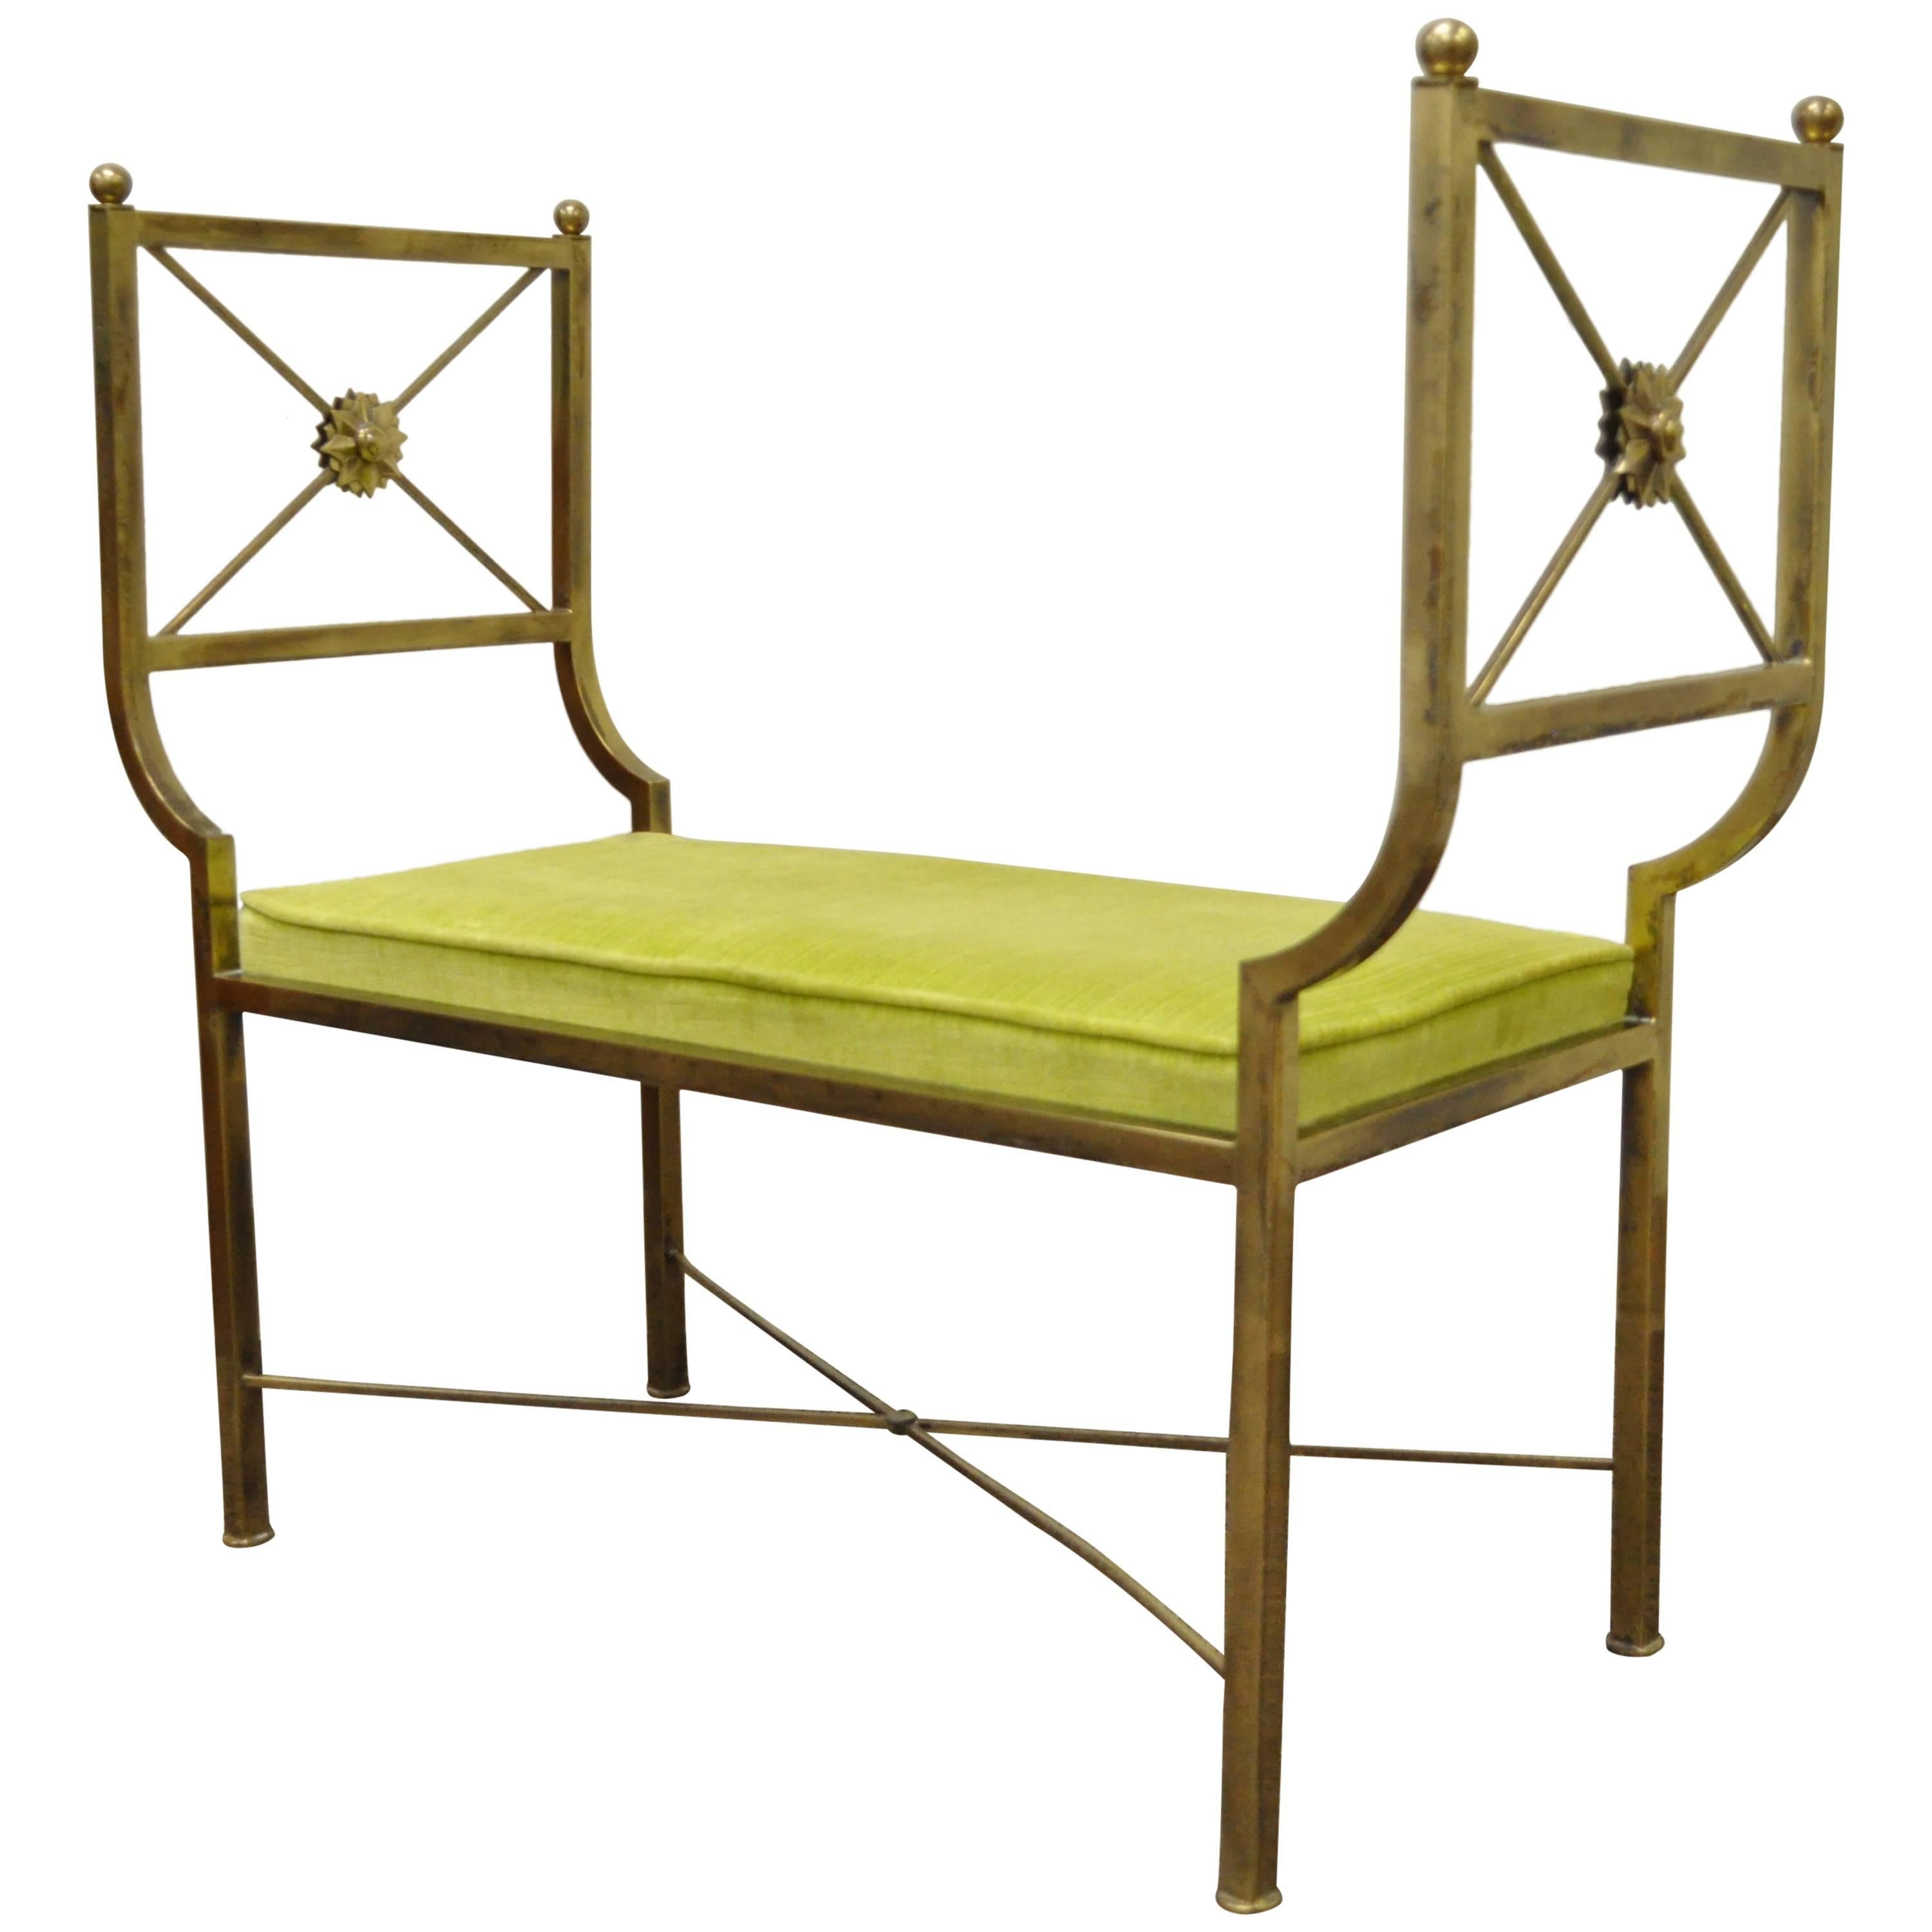 Brass Hollywood Regency Neoclassical Style Bench after Mastercraft X-Form